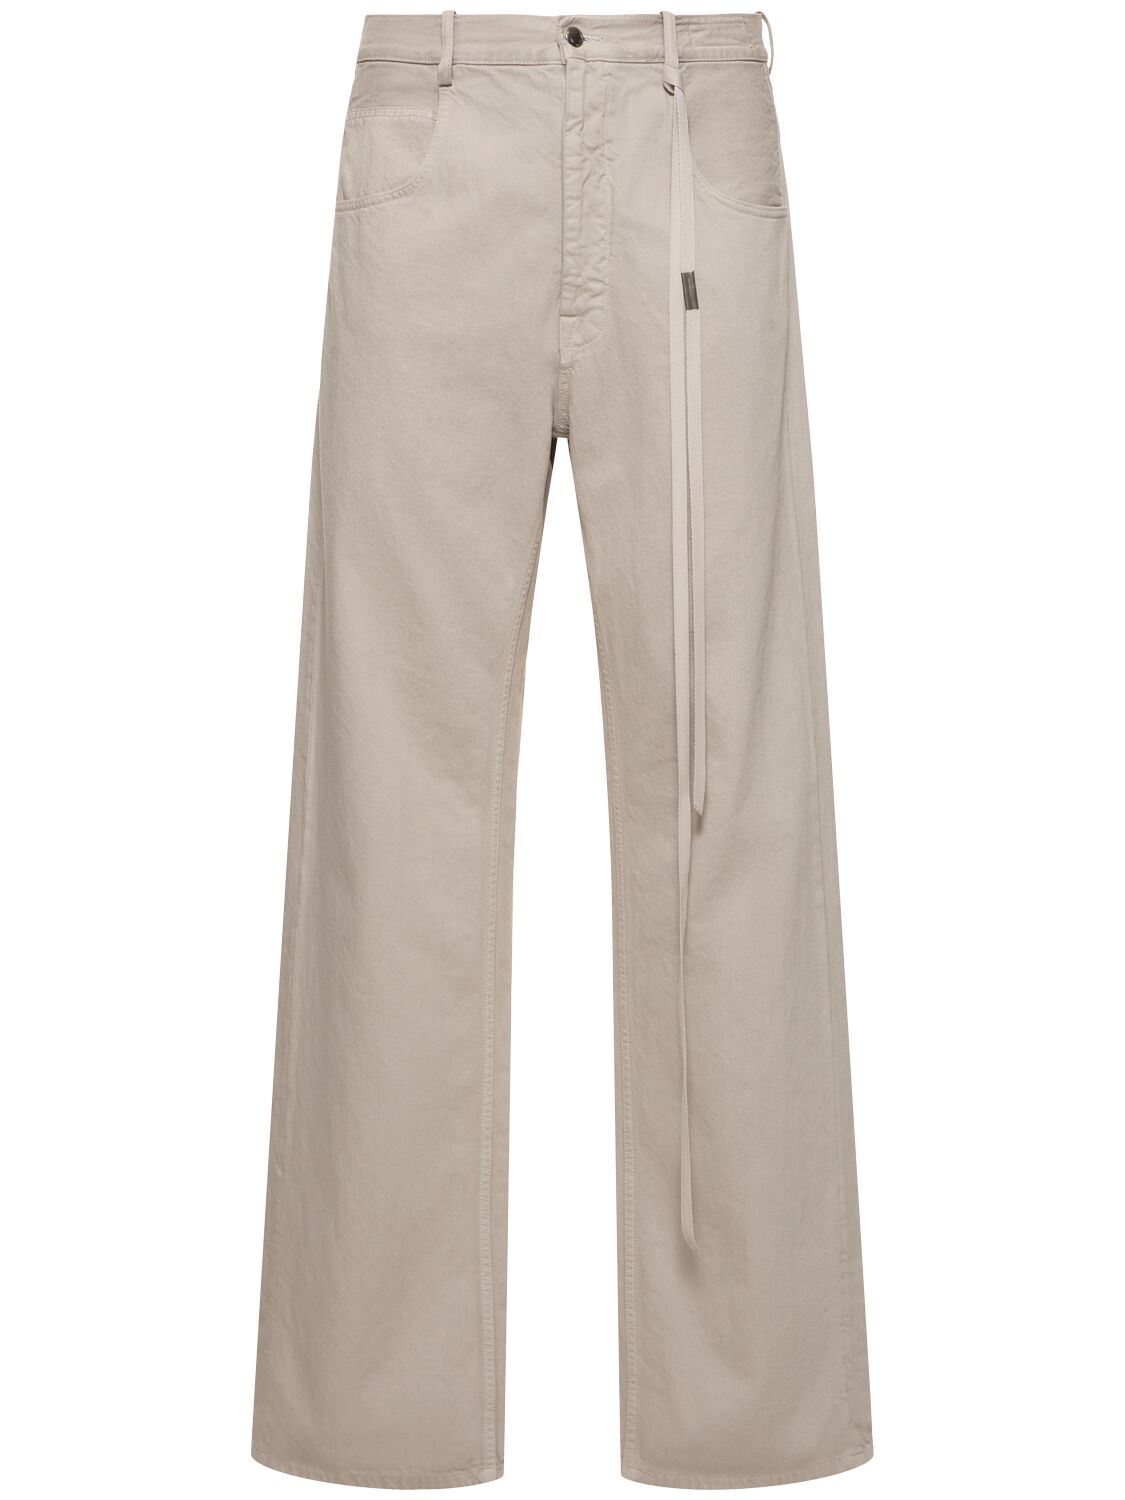 Ann Demeulemeester Ronald 5 Pocket Cotton Trousers In Clay